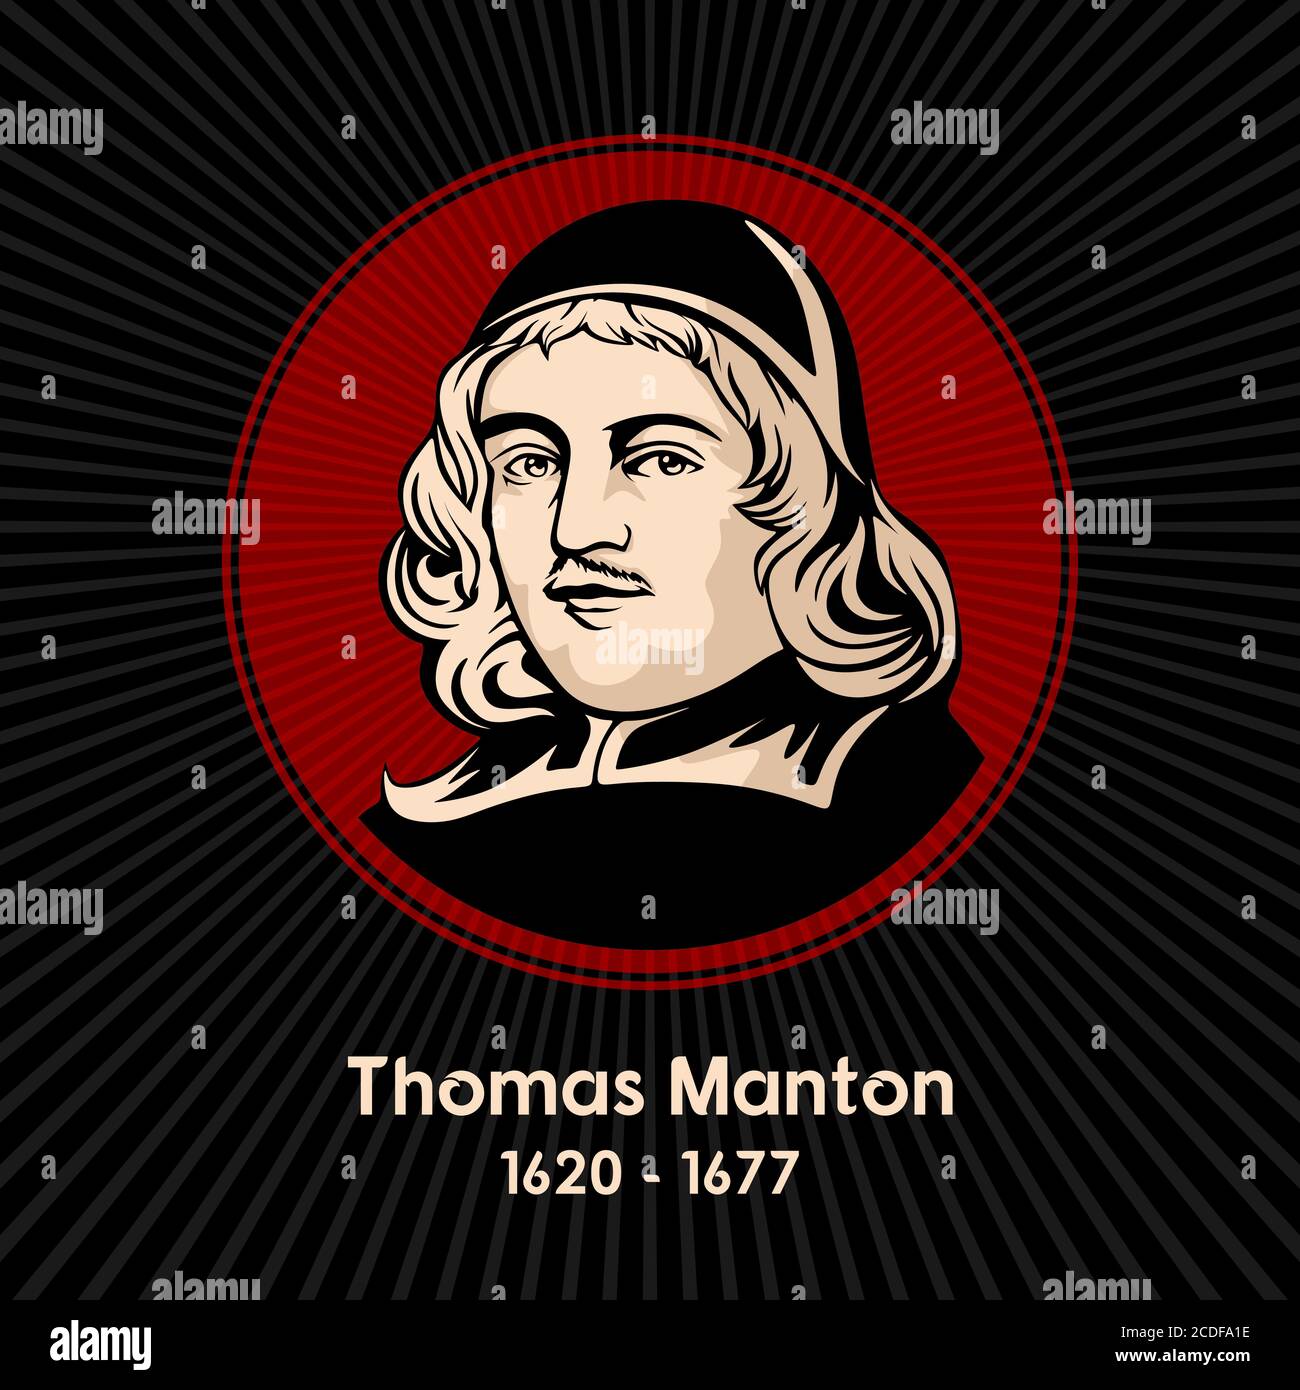 Thomas Manton (1620 - 1677) was an English Puritan clergyman. He was a clerk to the Westminster Assembly and a chaplain to Oliver Cromwell. Stock Vector